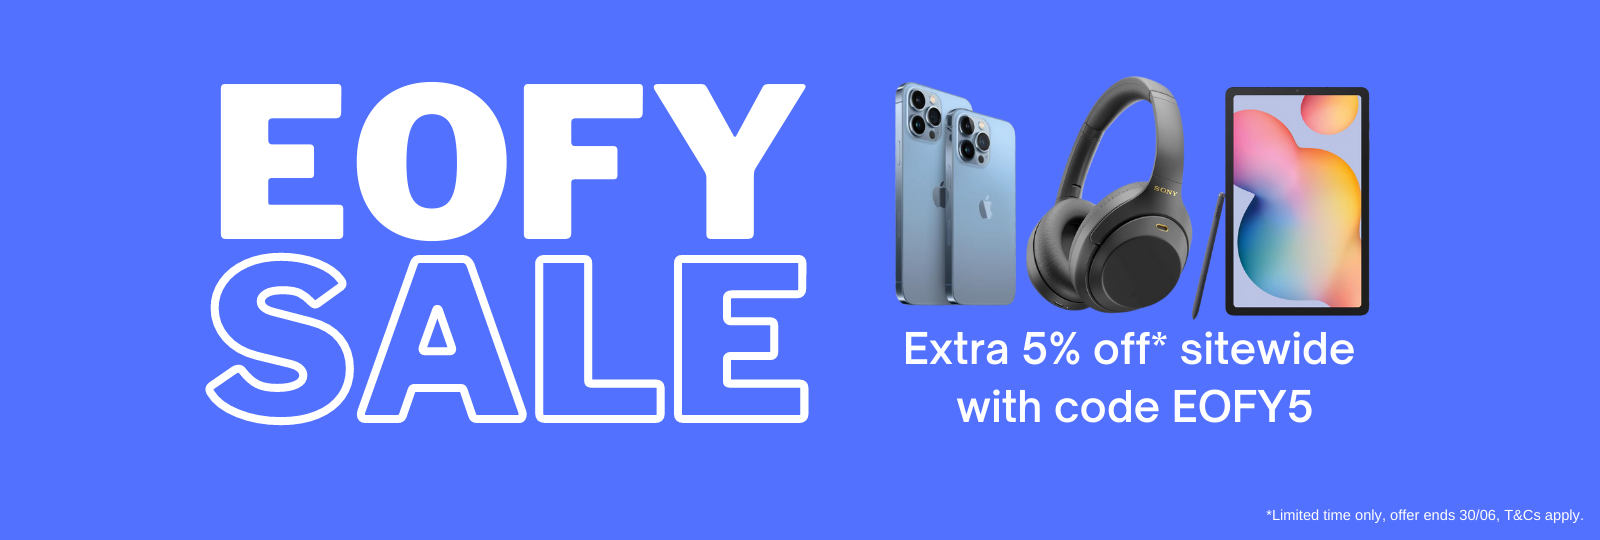 Mobileciti EOFY sale Up to 50% OFF + extra 5% OFF sitewide with promo code